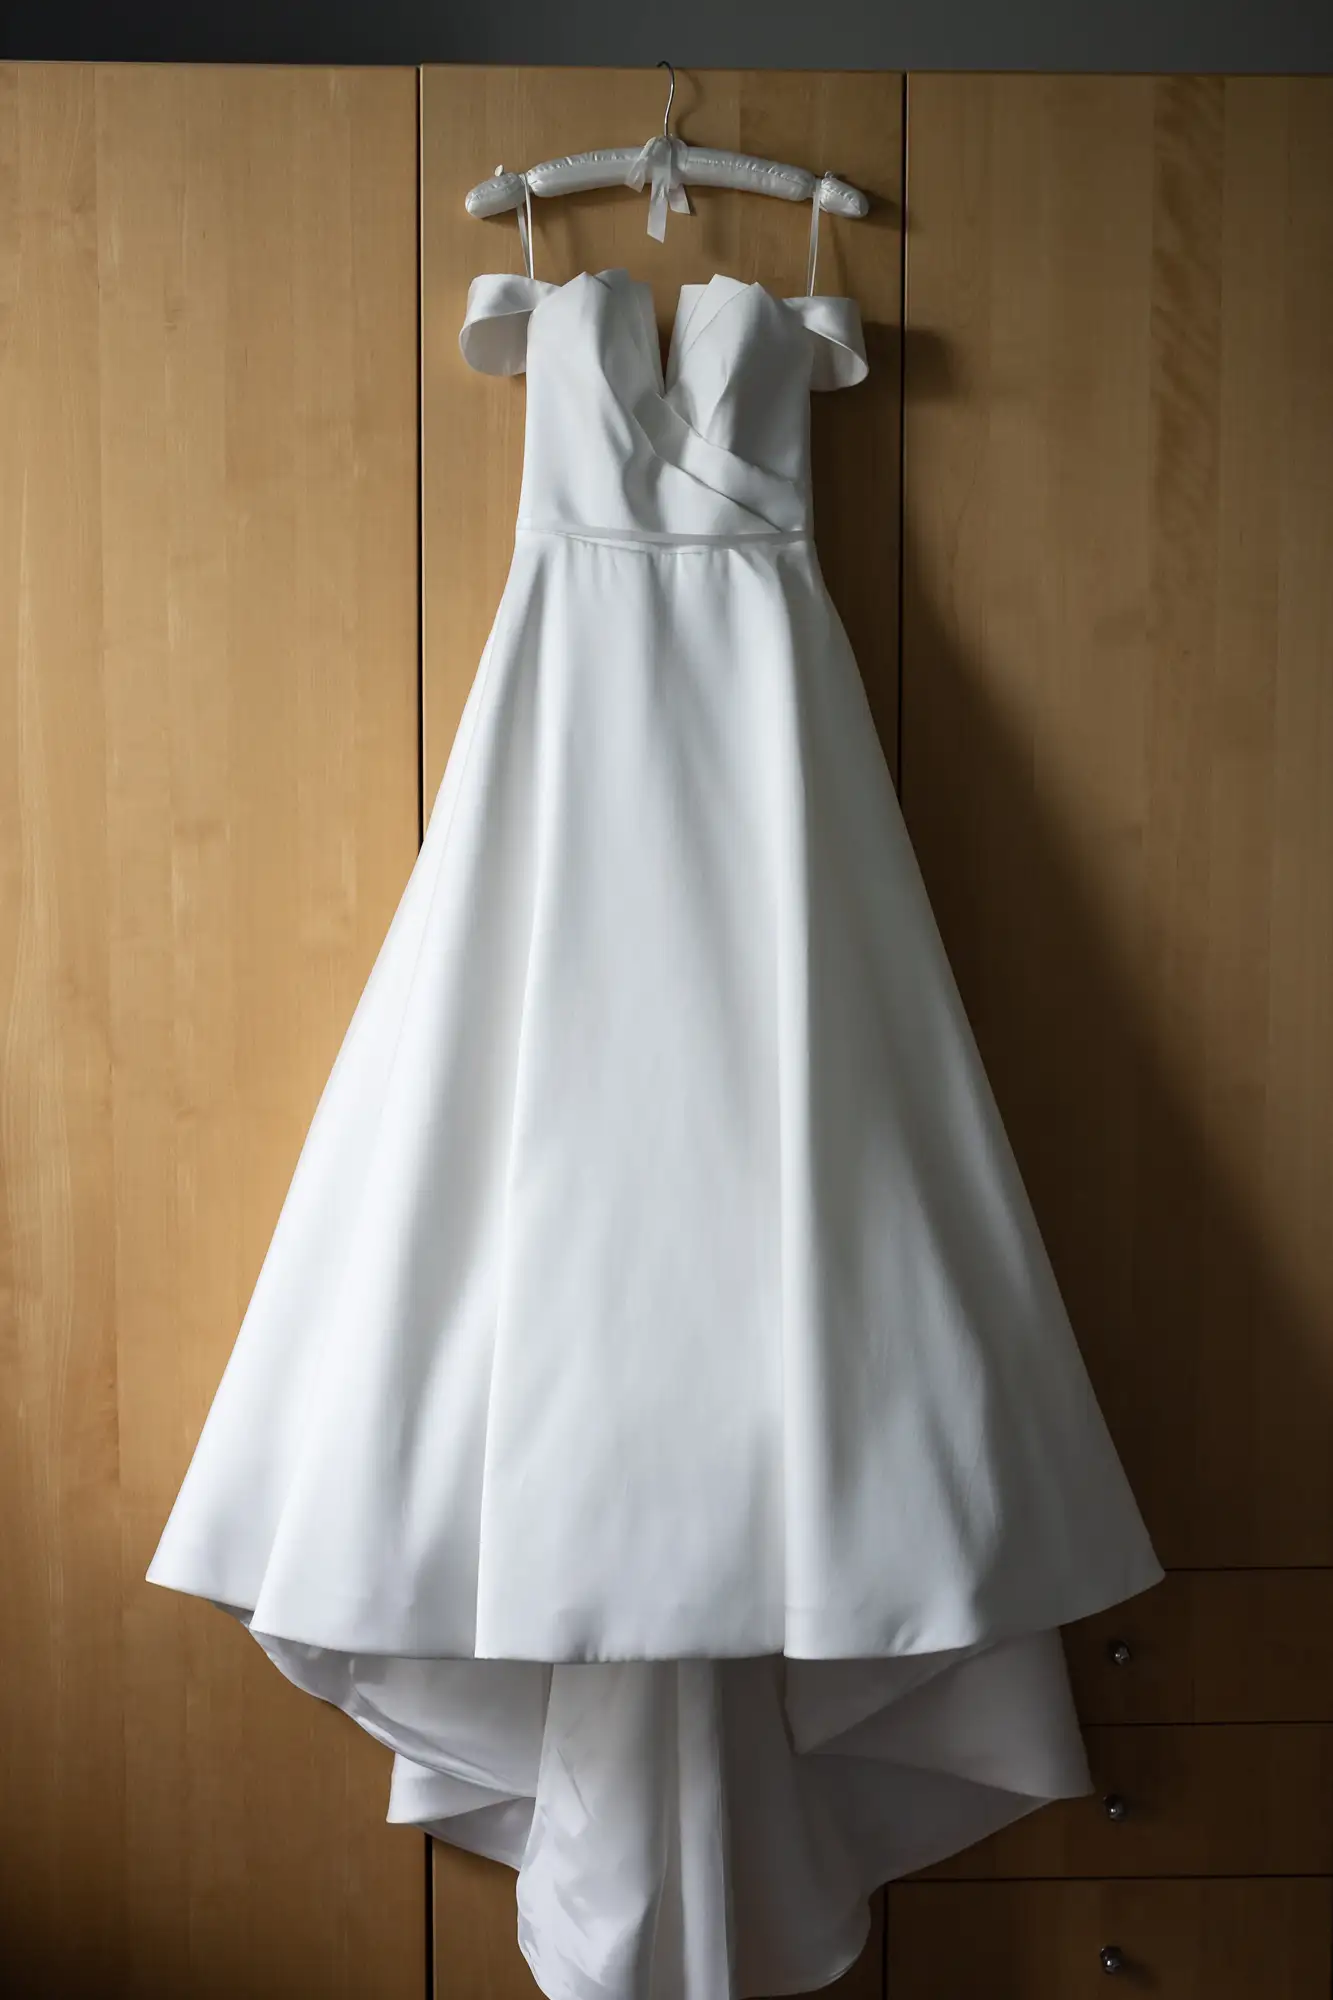 A white wedding dress with a full skirt and tailored bodice hangs on a wooden hanger against a wooden closet door.